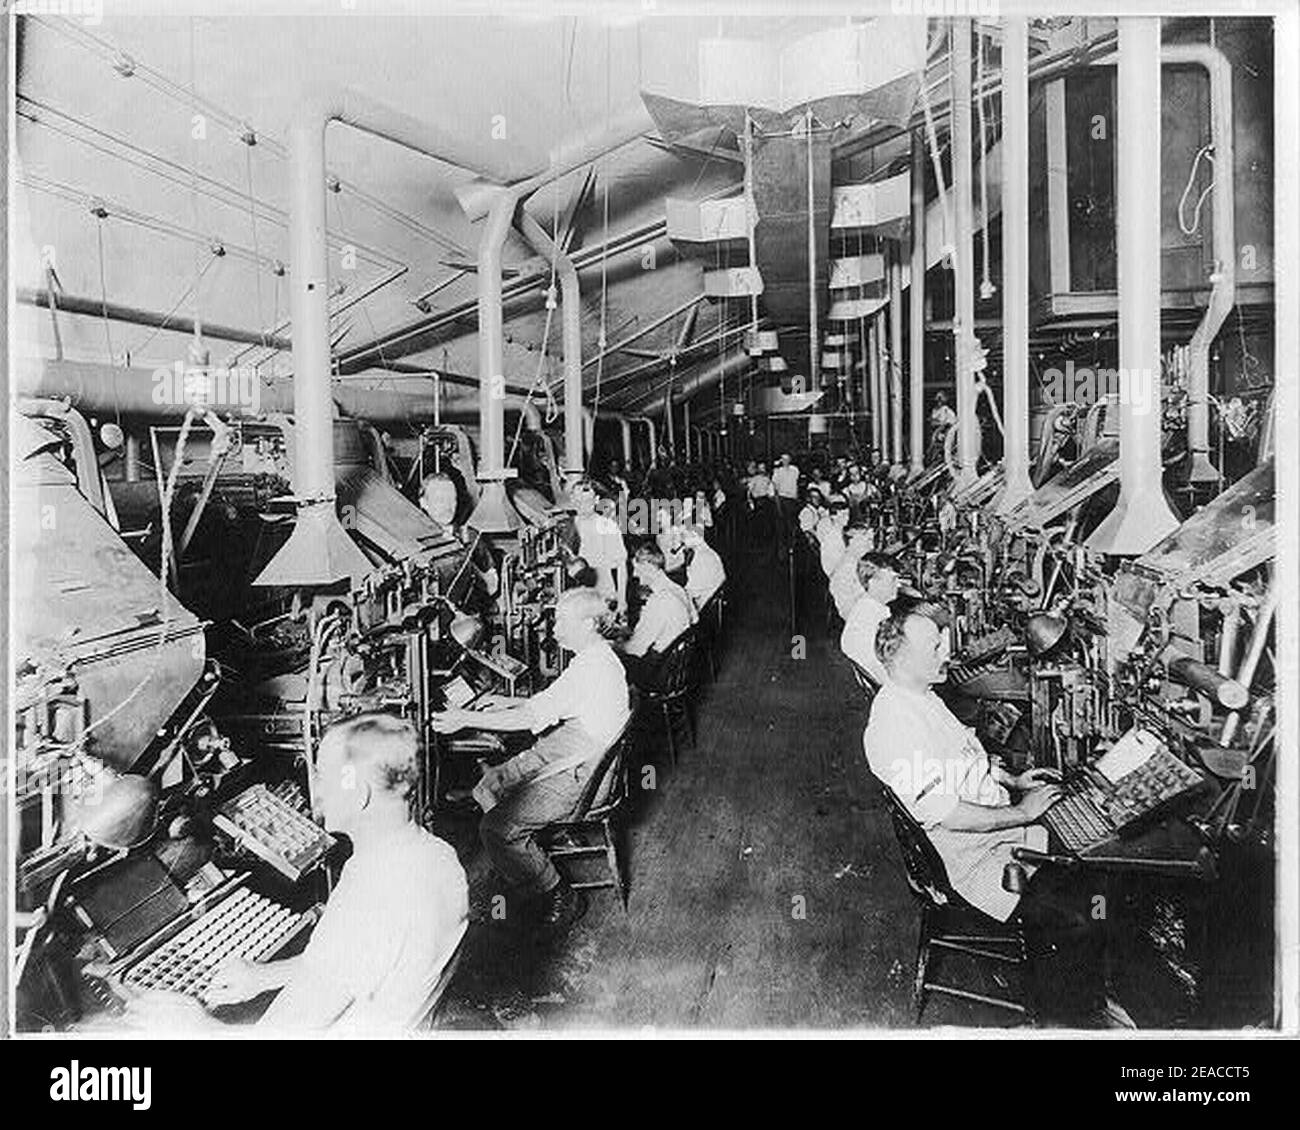 Newspaper publishing - N.Y. Herald- Composing room and linotype machines Stock Photo